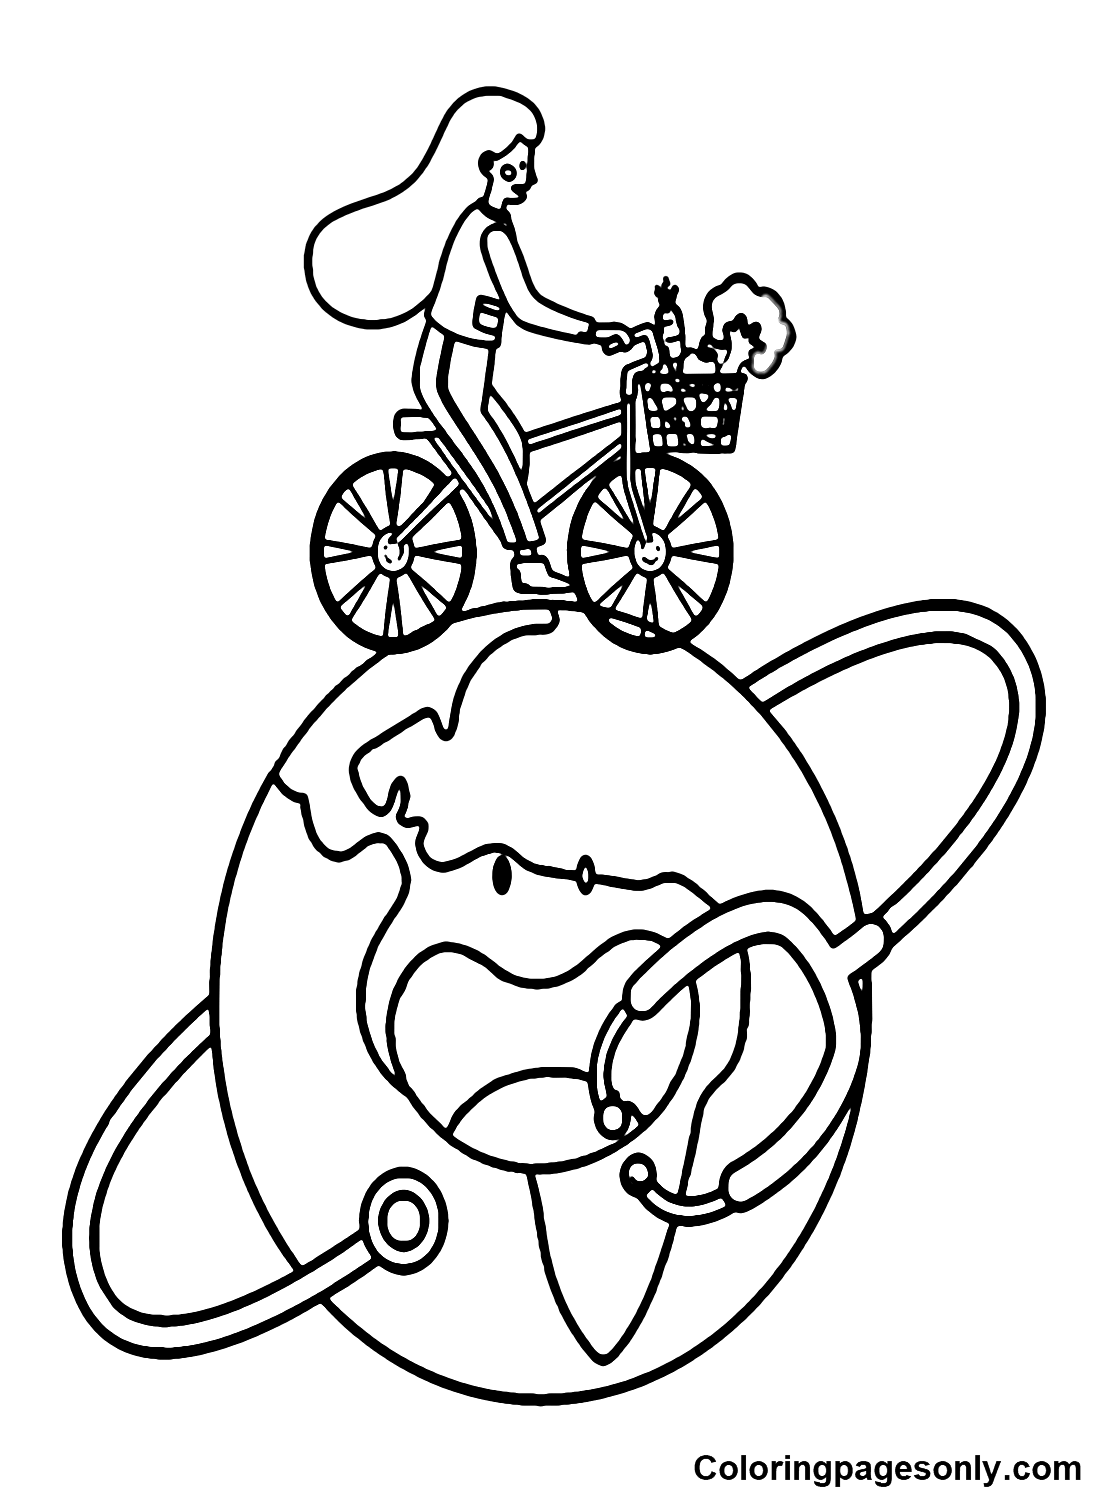 World Health Day for Children Coloring Pages